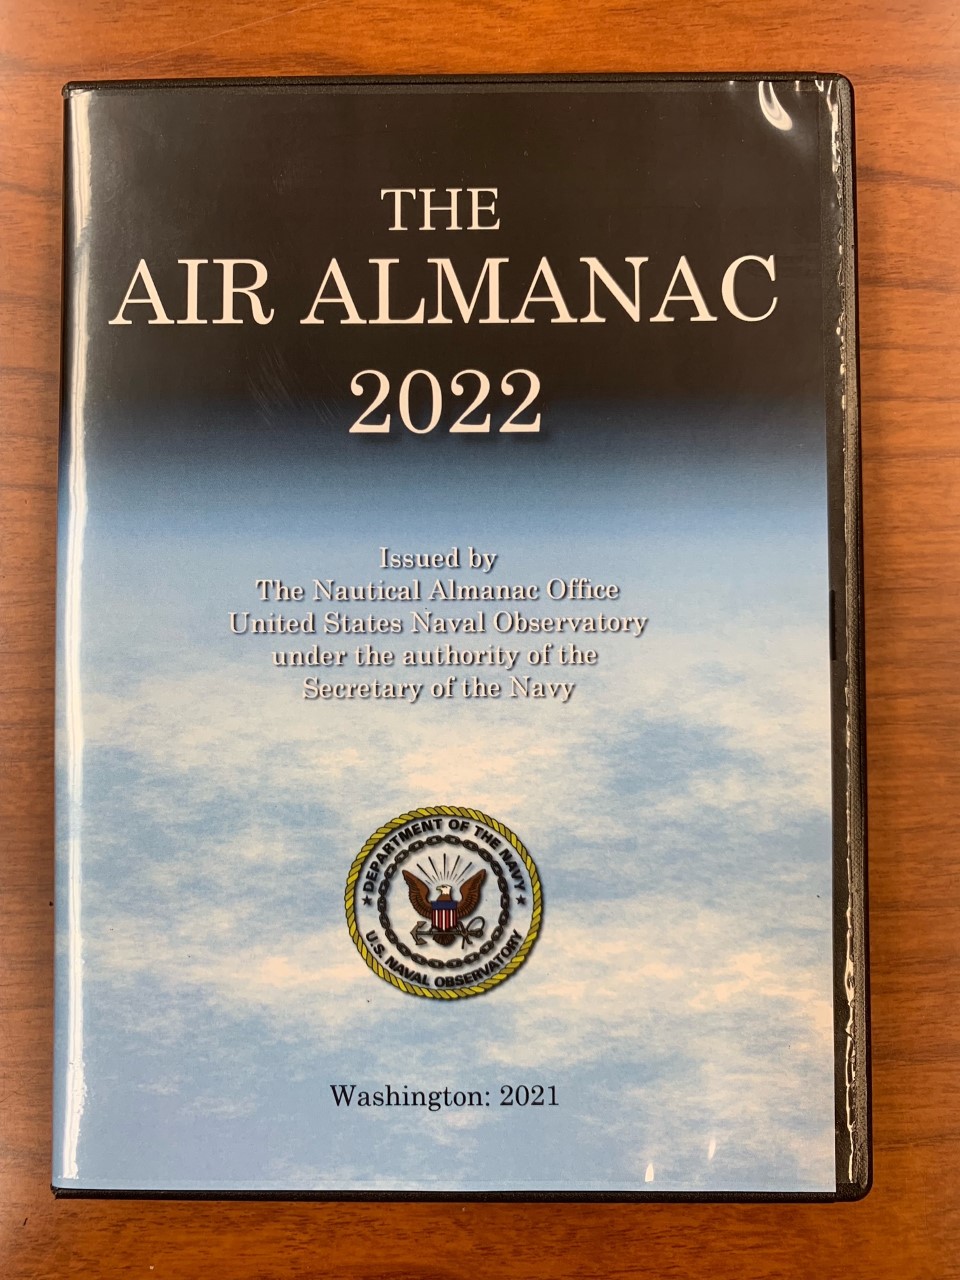 Picture of the 2021 Air Almanac box and CD